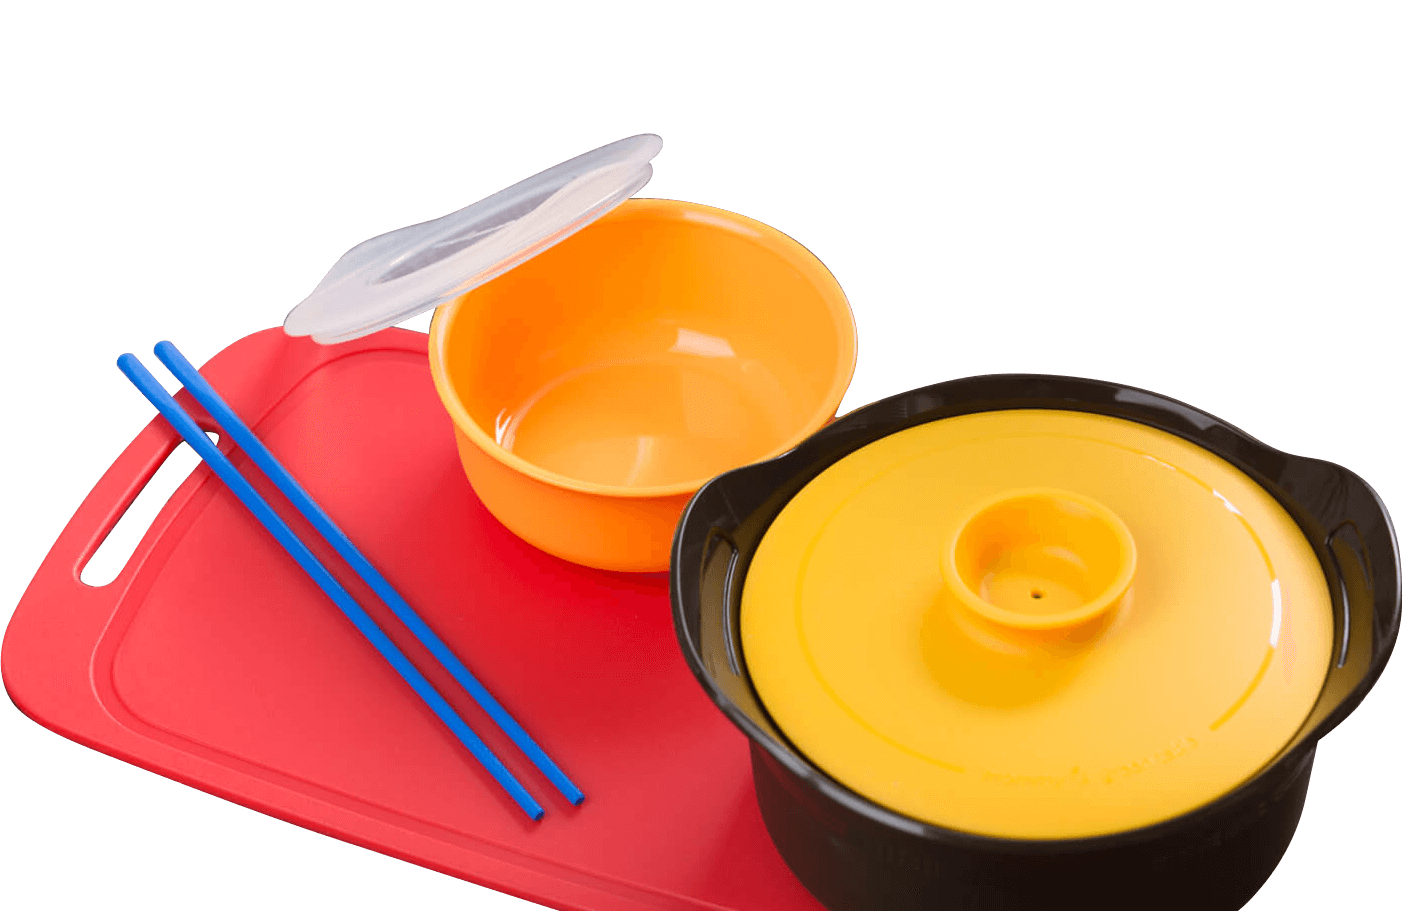 Outstanding Korean Kitchen Utensils For Convenience In Style 